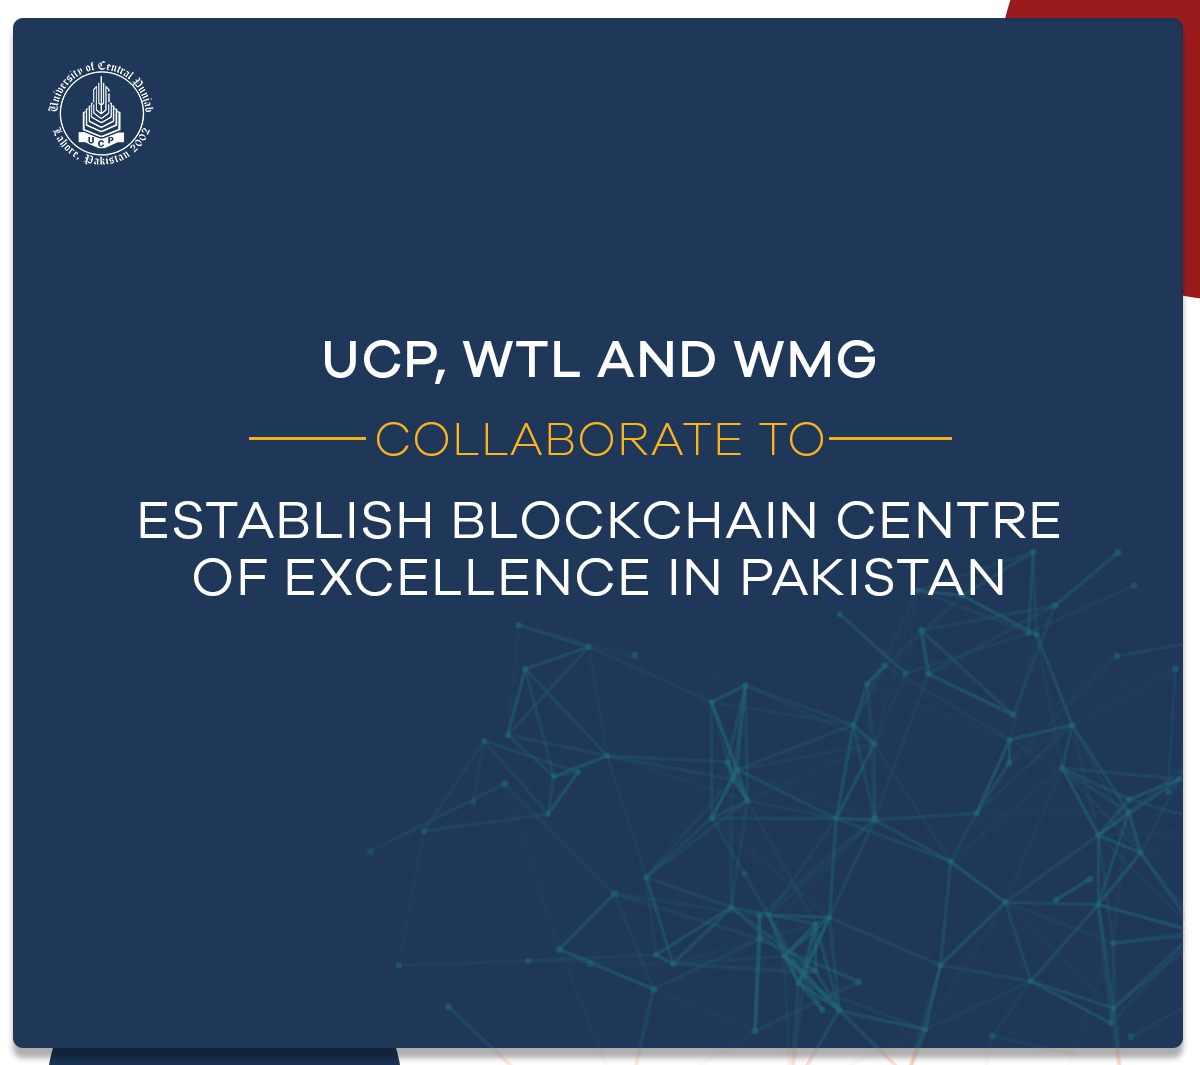 UCP, WTL and WMG collaborate to establish Blockchain Centre of Excellence in Pakistan